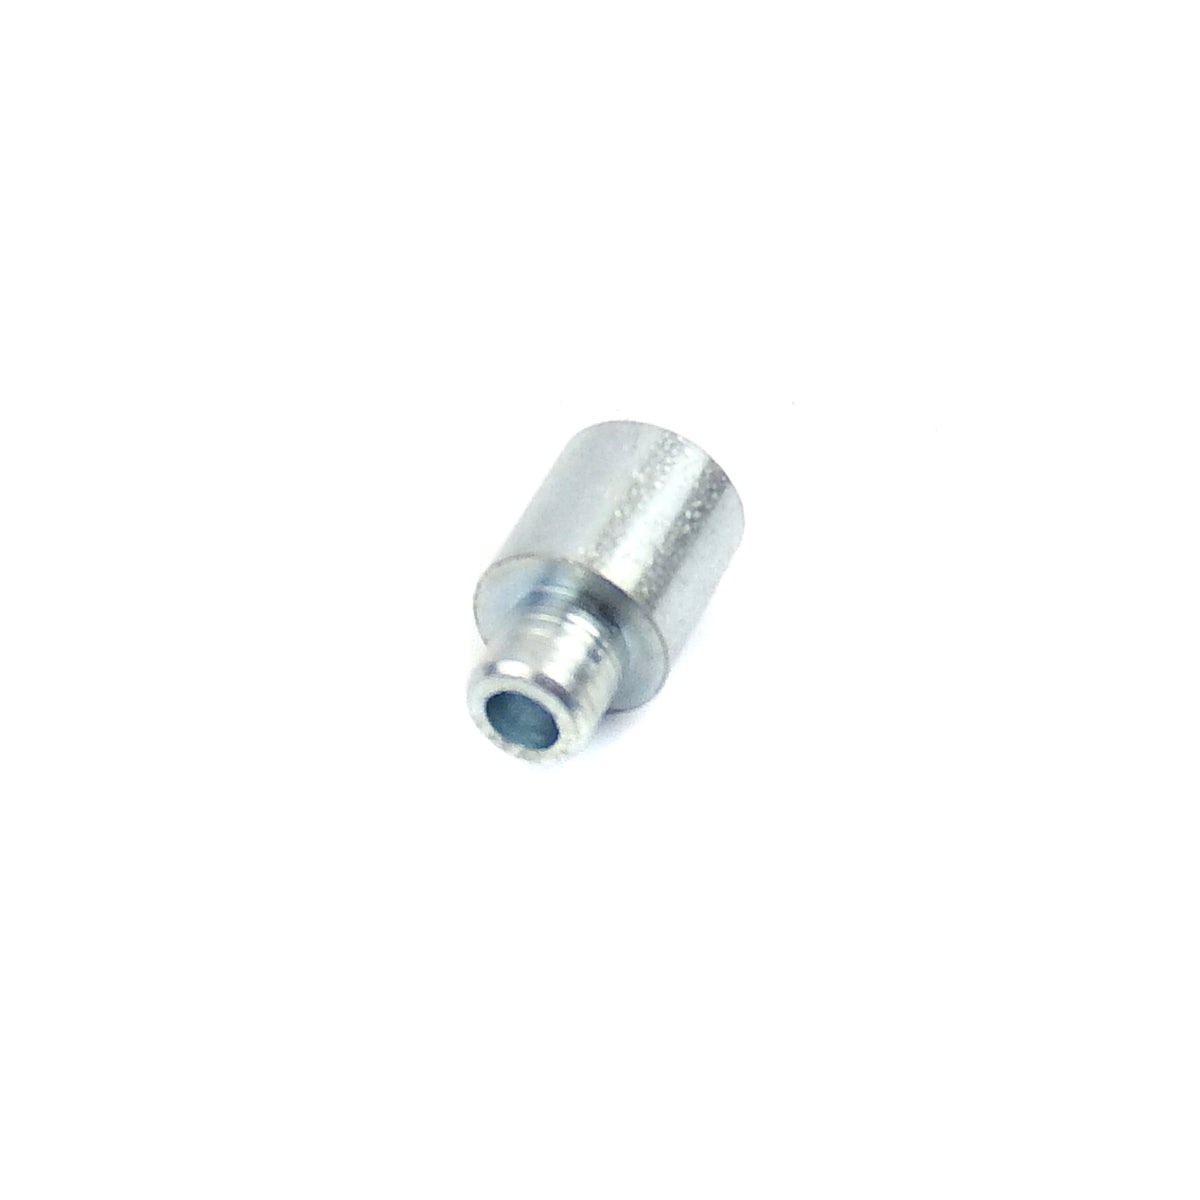 Cable - Med Cable Top Hat 7mm x 13mm